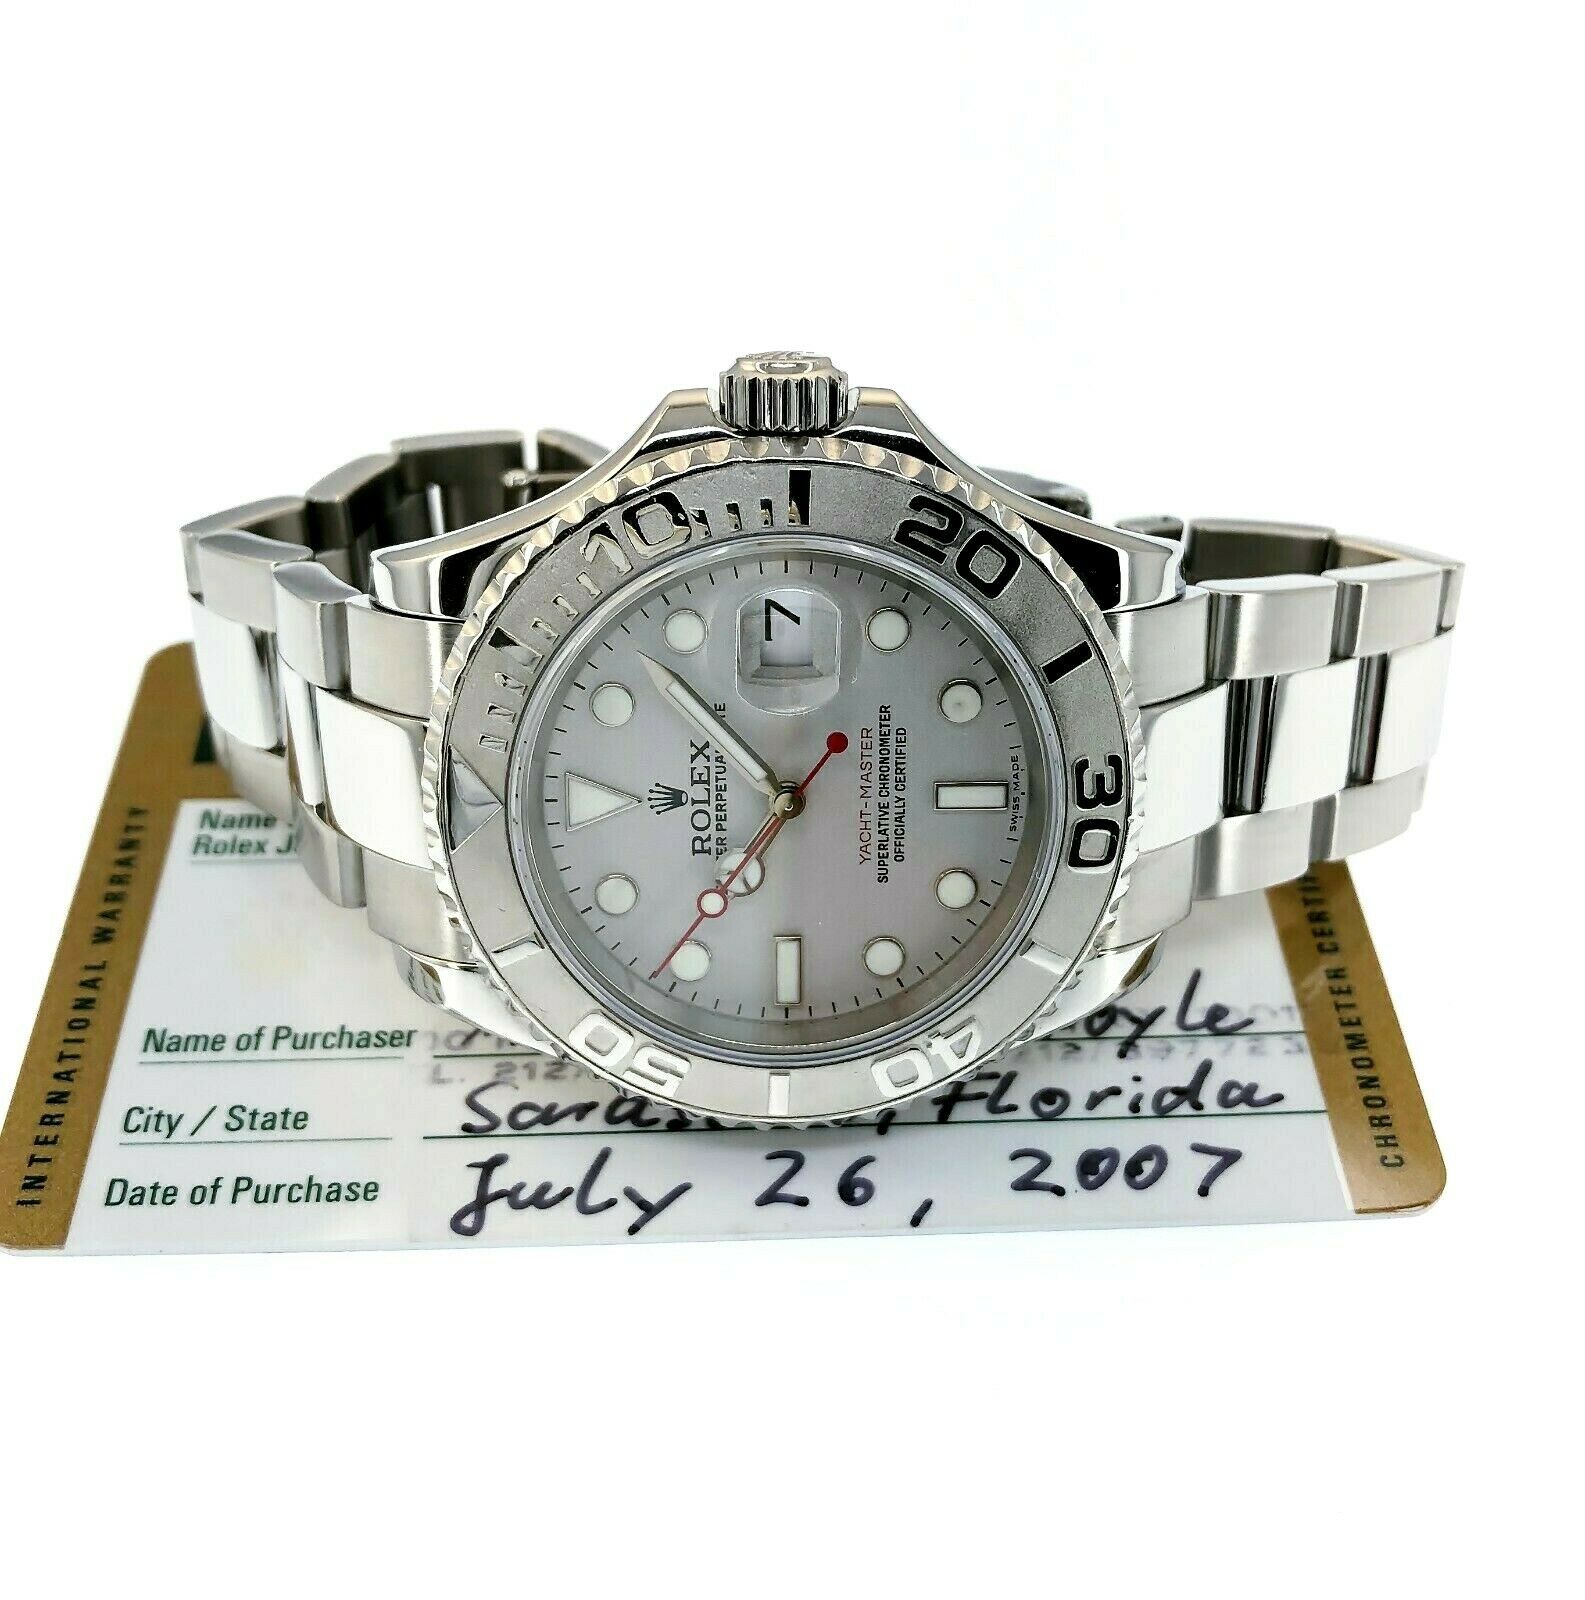 Rolex 40MM Mens Yacht-Master Platinum and Steel Watch Ref # 16622 Box and Card